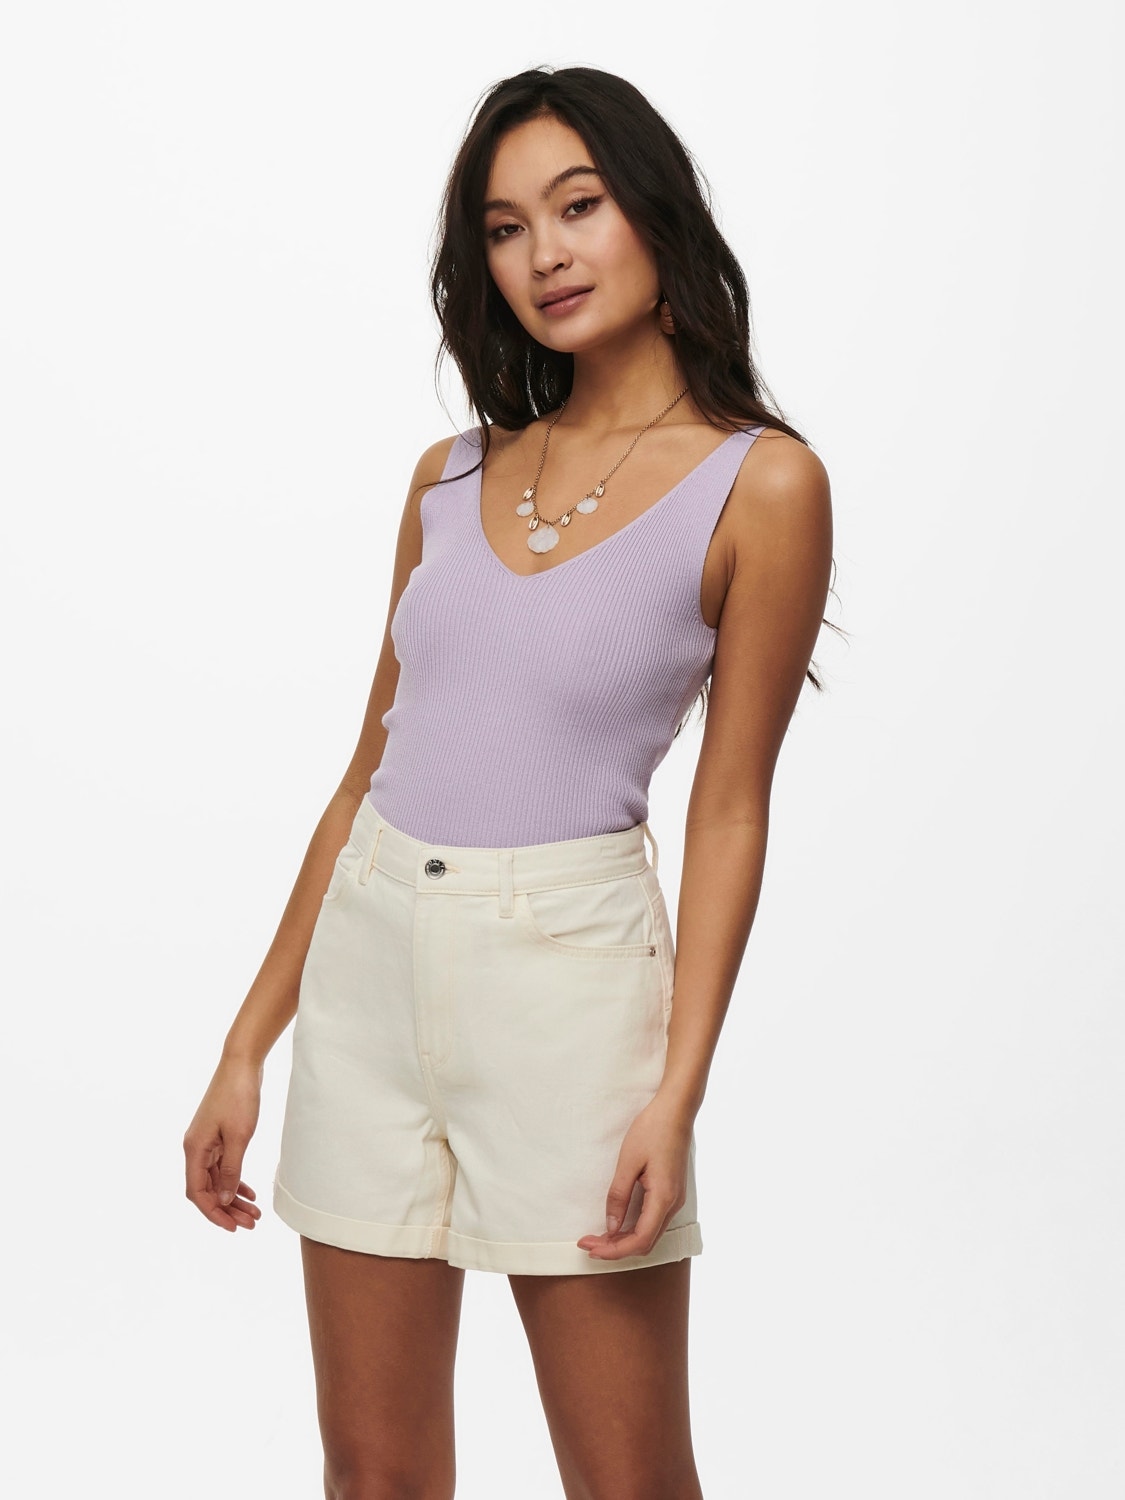 ONLY V-hals Mouwloze top -Pastel Lilac - 15180497